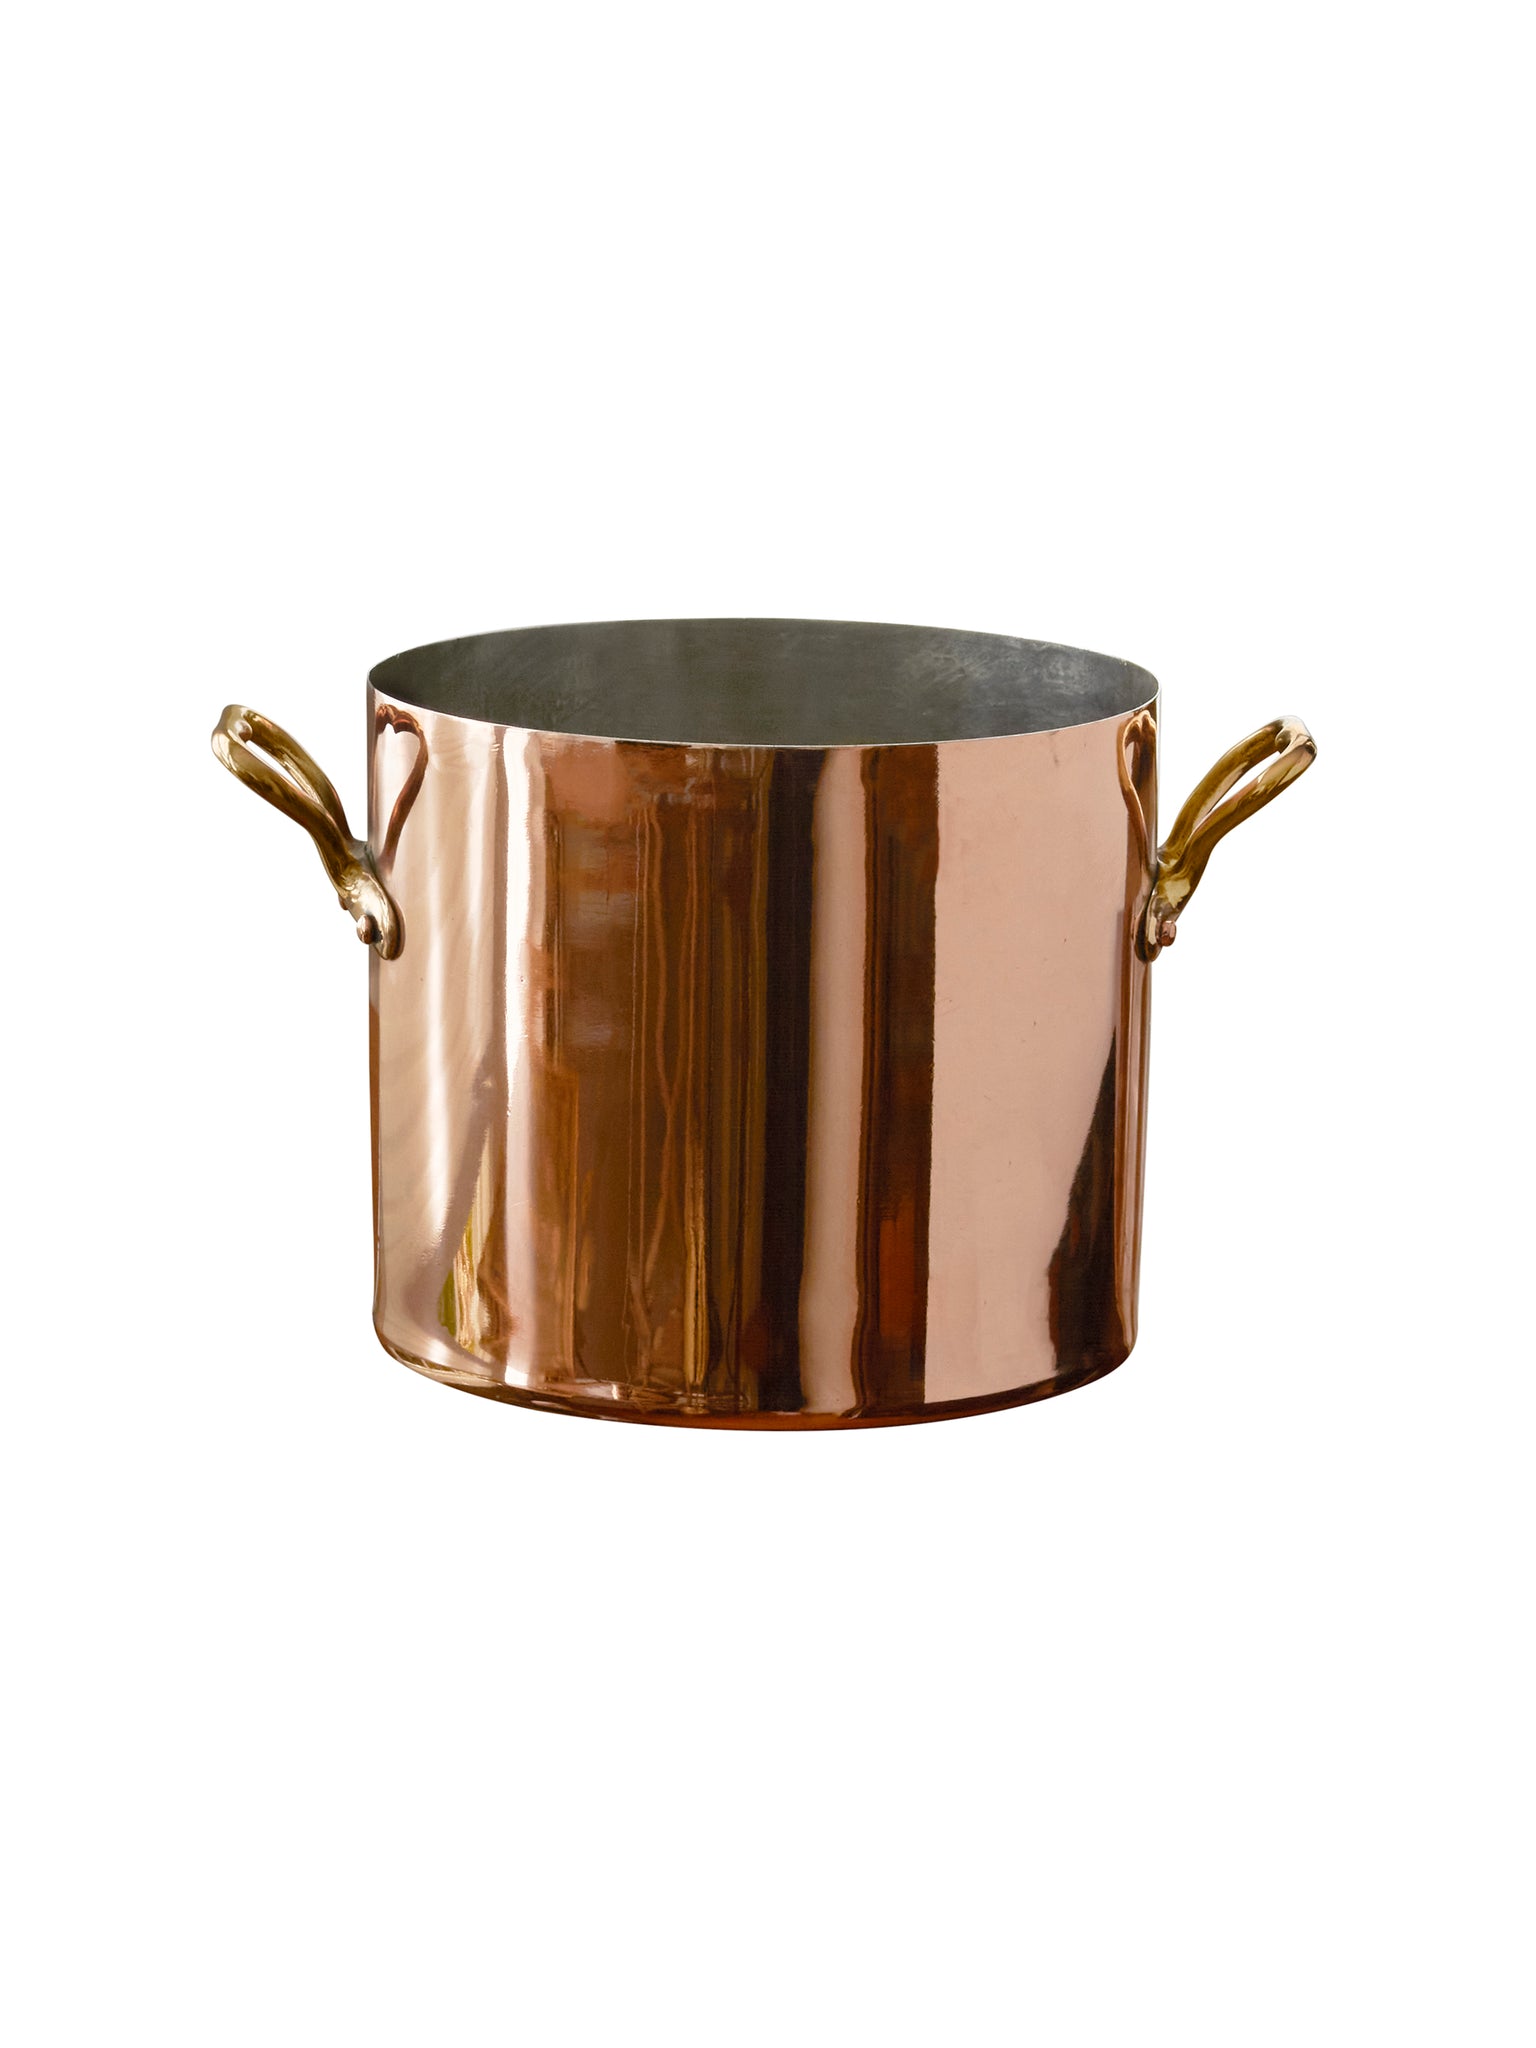 Vintage 1900 French Copper Double Boiler Weston Table